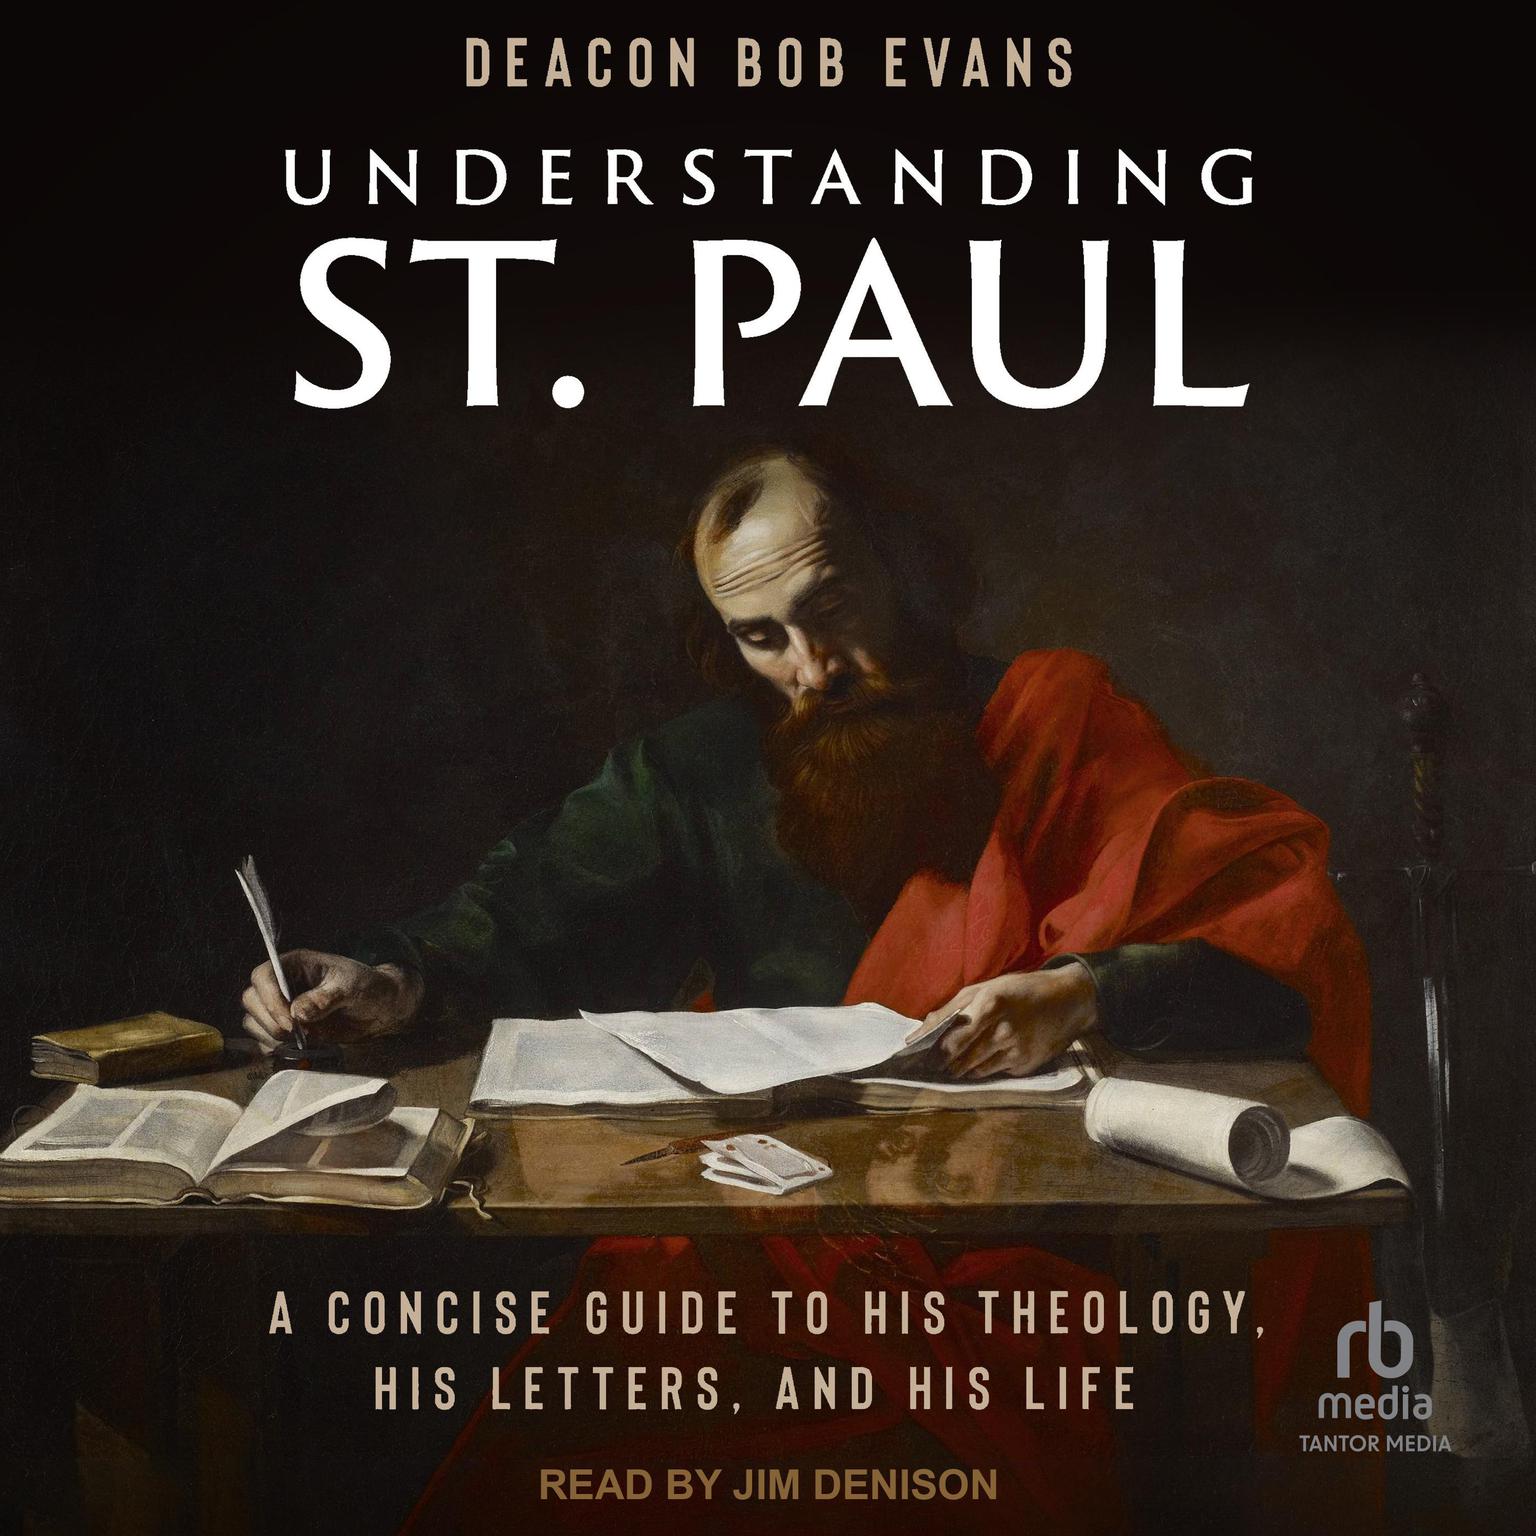 Understanding St. Paul: A Concise Guide to His Theology, His Letters, and His Life Audiobook, by Deacon Bob Evans